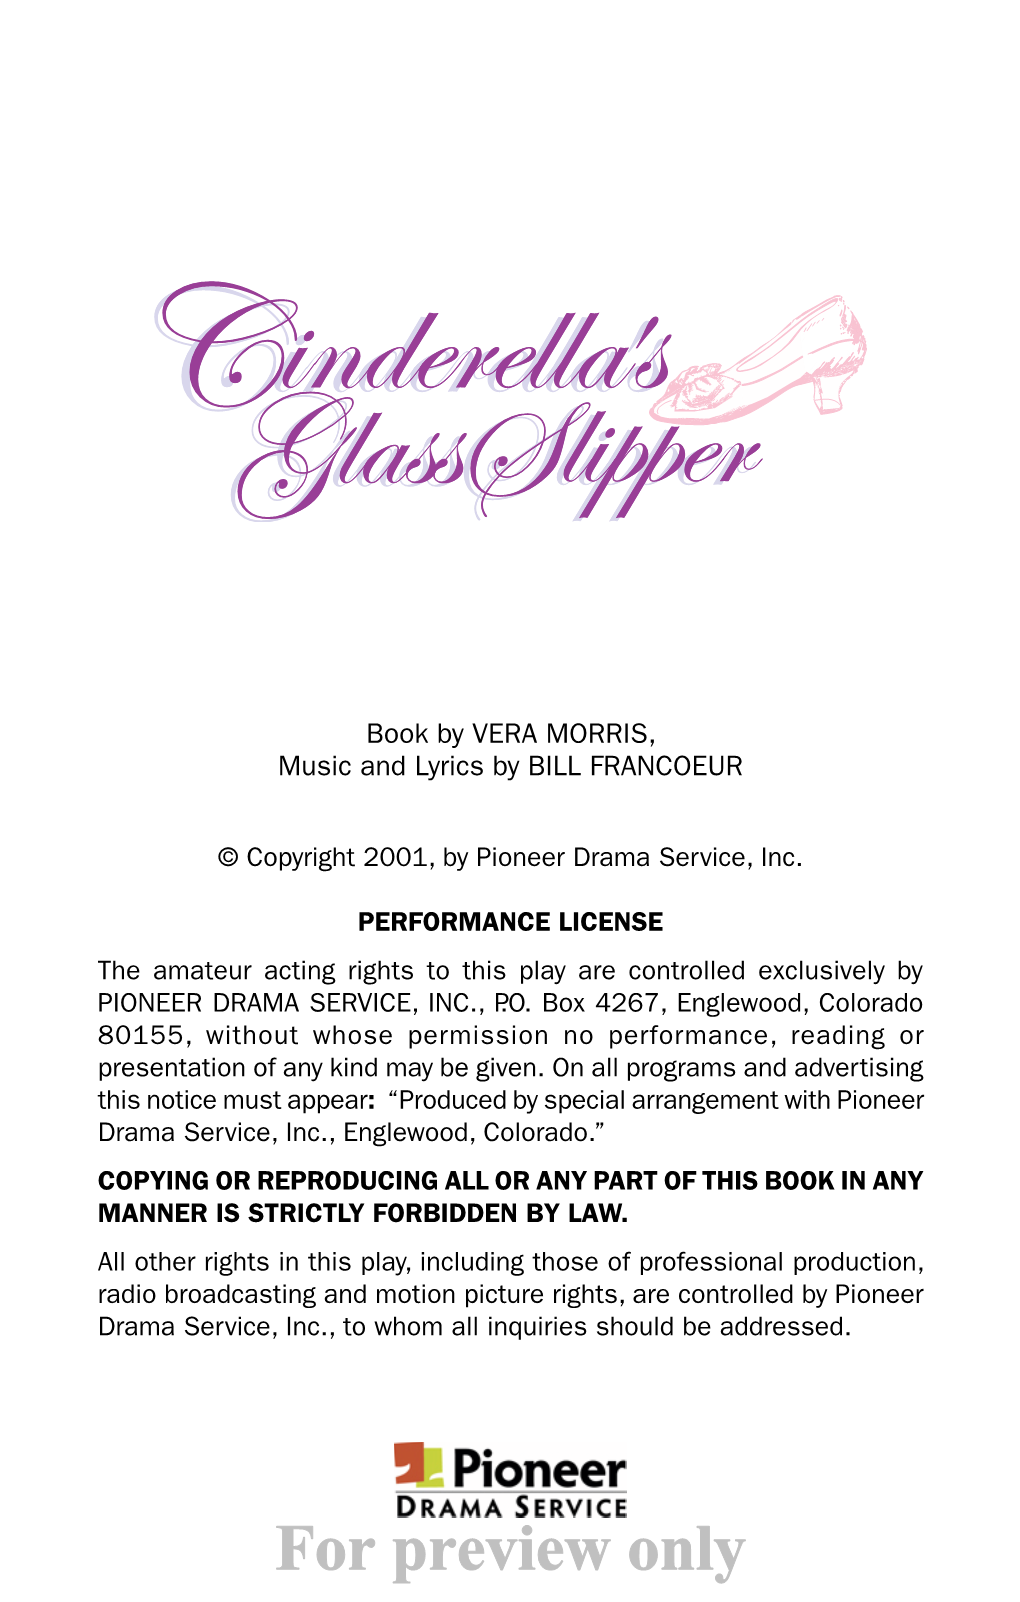 For Preview Only CINDERELLA’S GLASS SLIPPER Book by VERA MORRIS Music and Lyrics by BILL FRANCOEUR